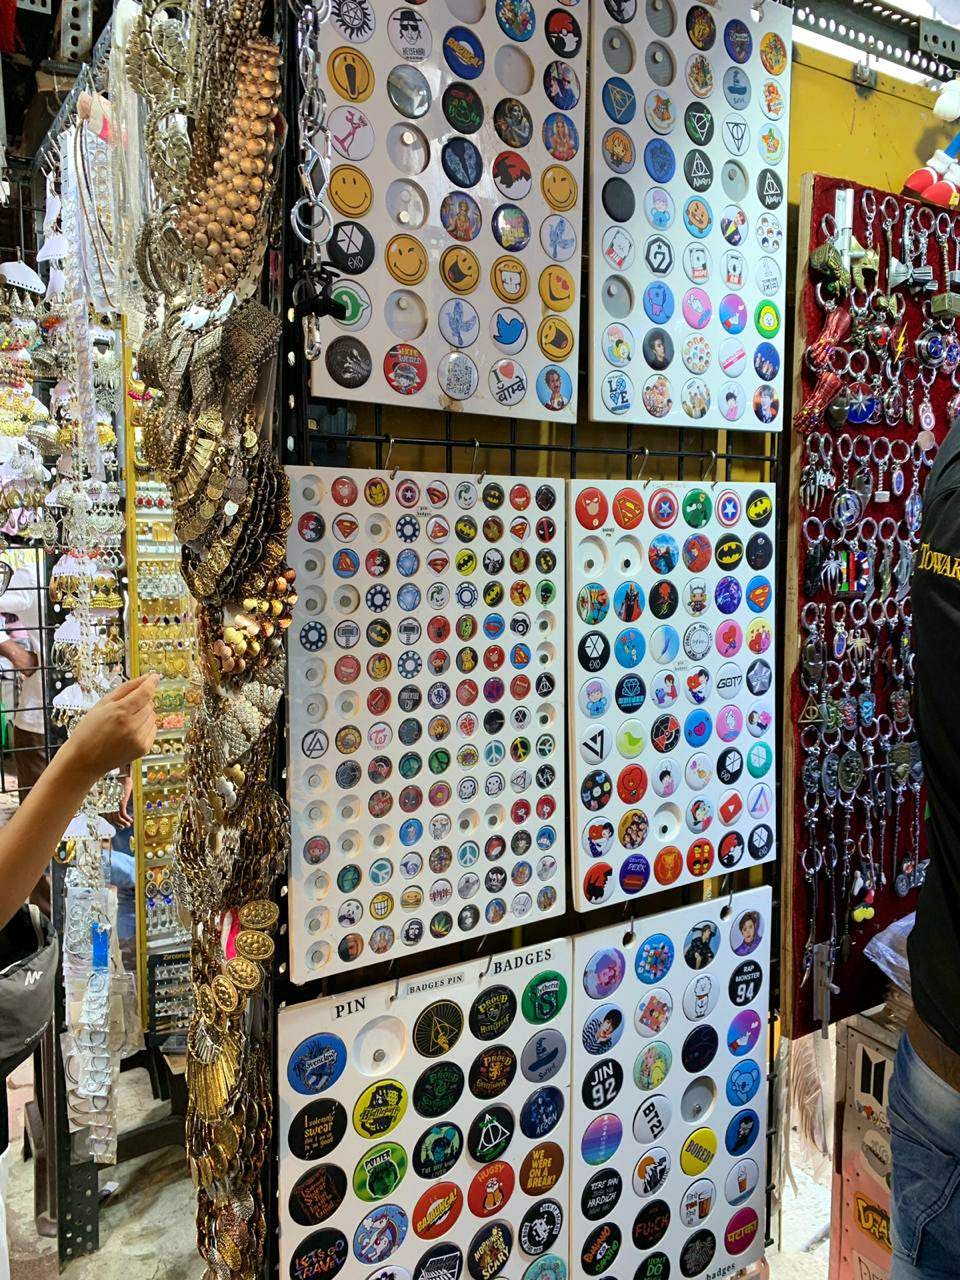 Super Hero Miniatures Stickers  Pins At A Reasonable Price At Colaba  Causeway  LBB